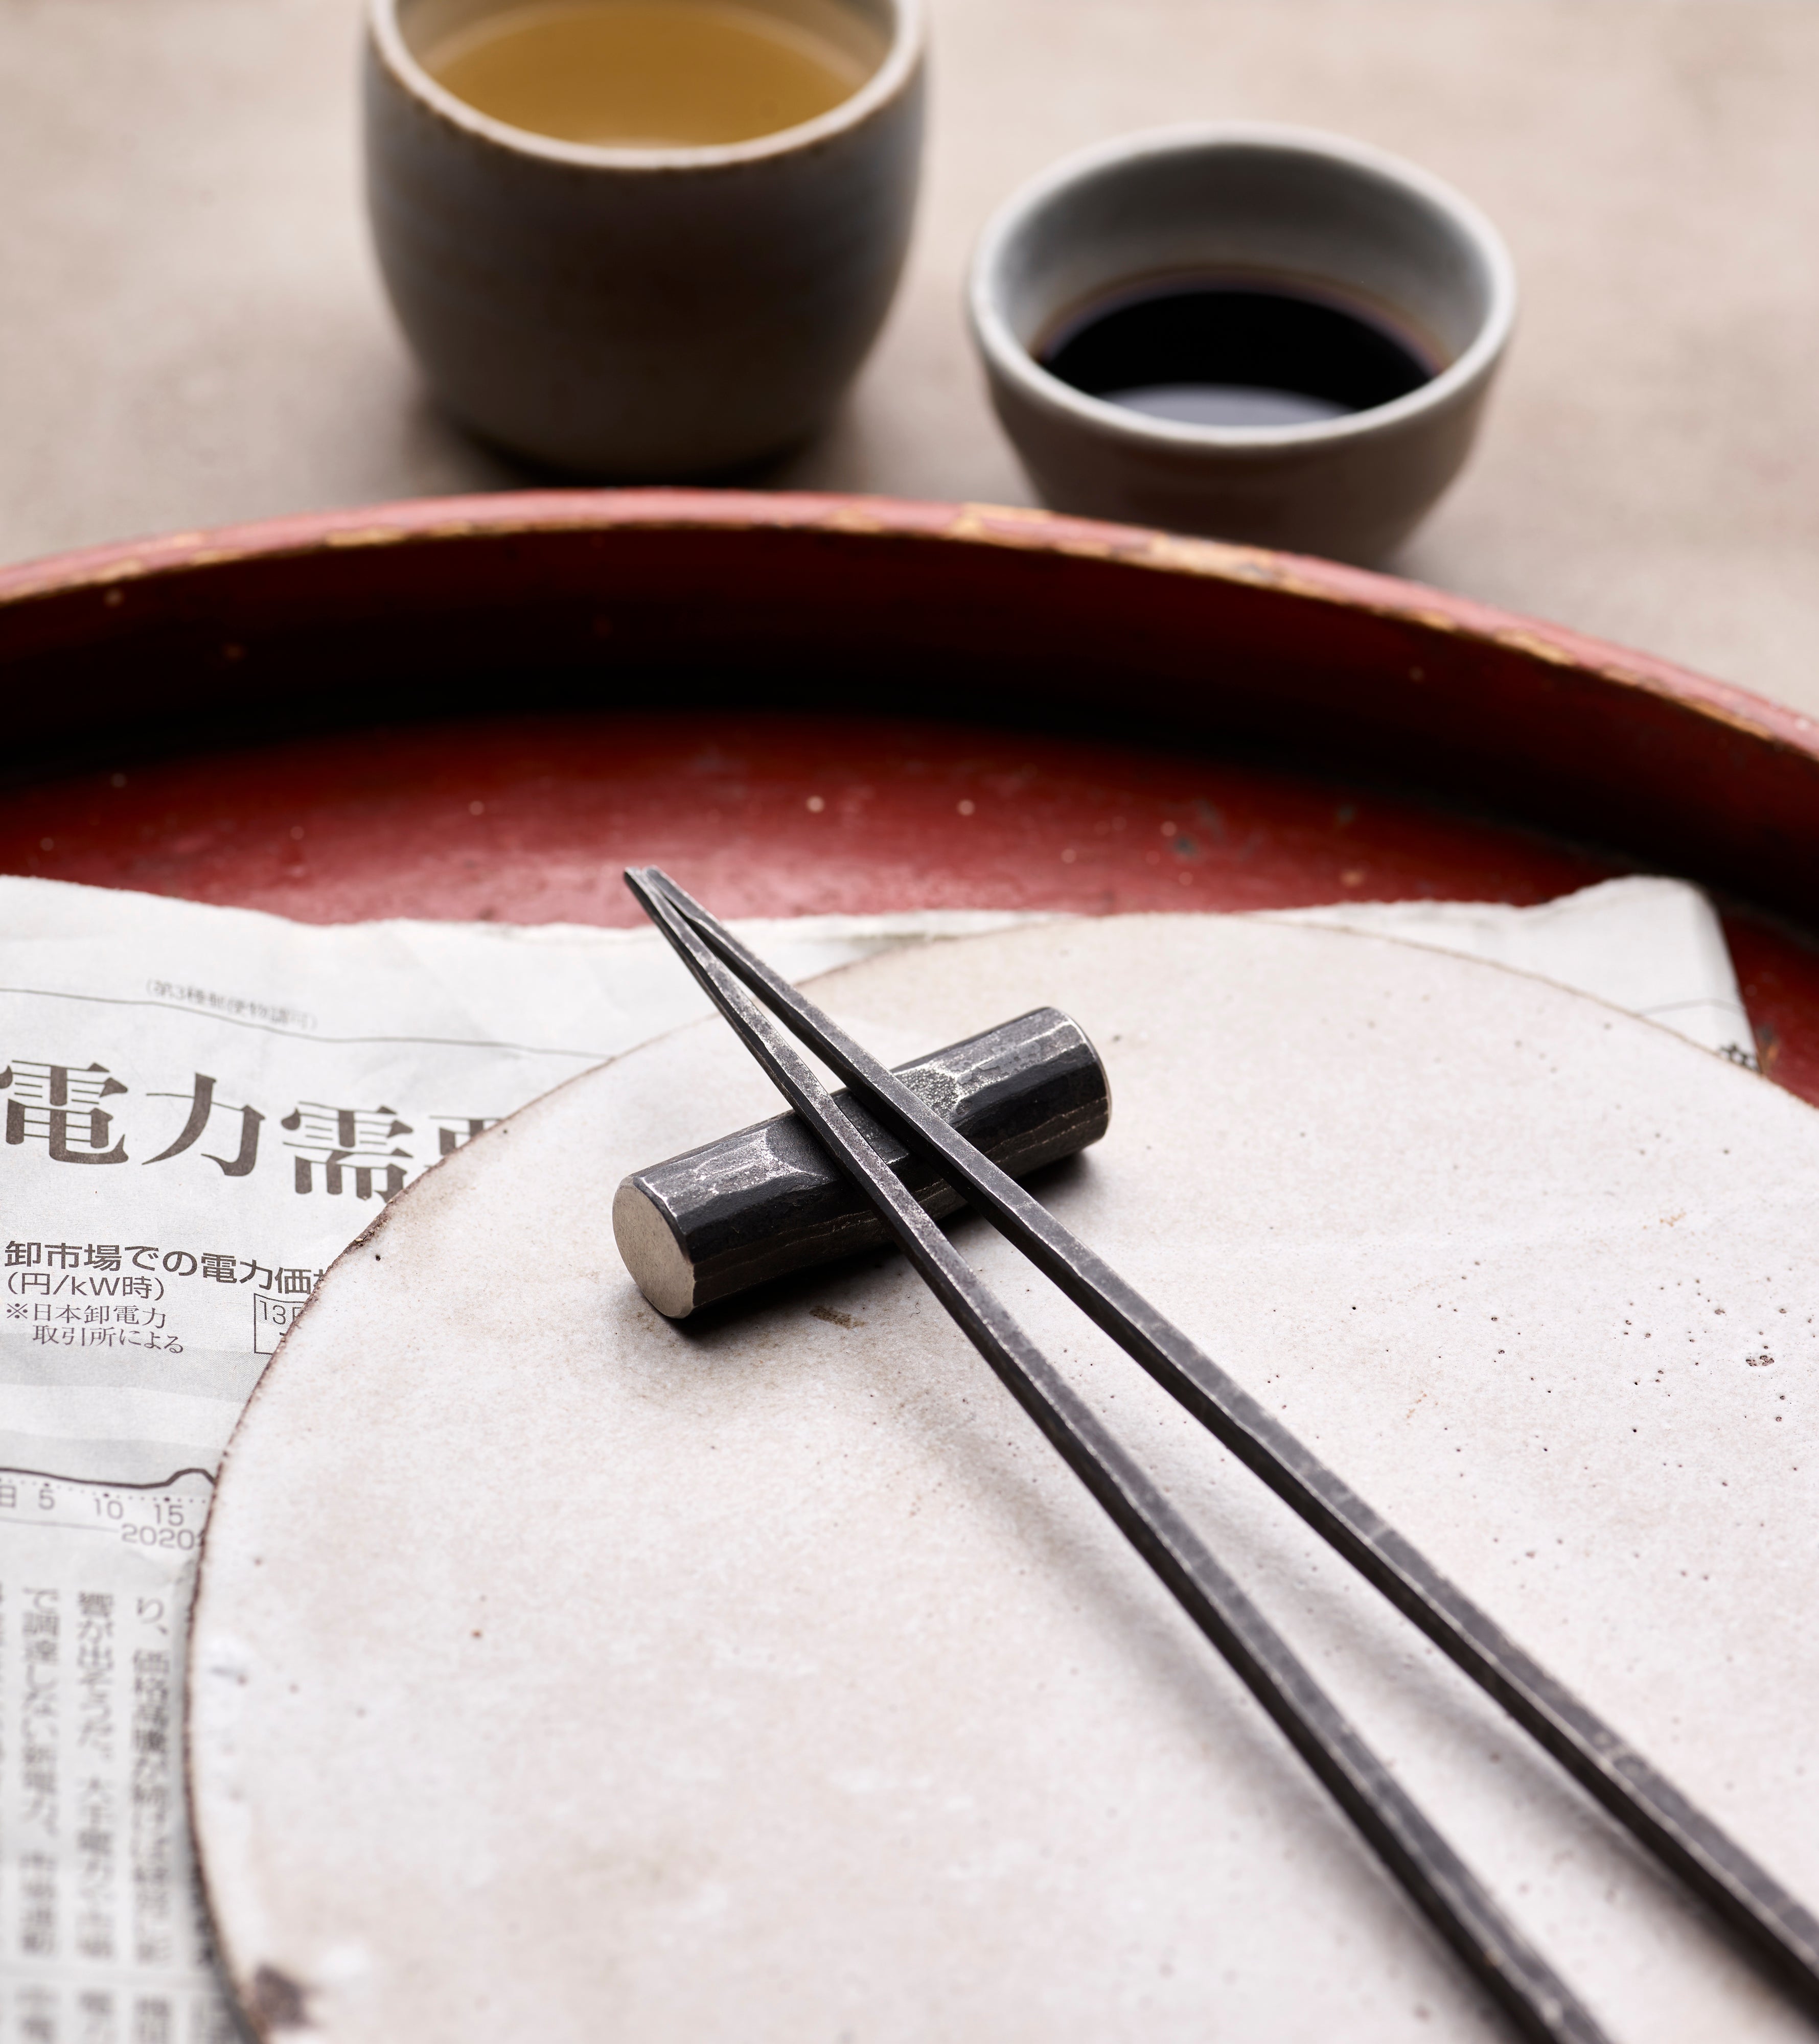 JAPANESE TABLEWARE AND COOKING WITH MASAKI SUGISAKI 10-11th AUGUST '24